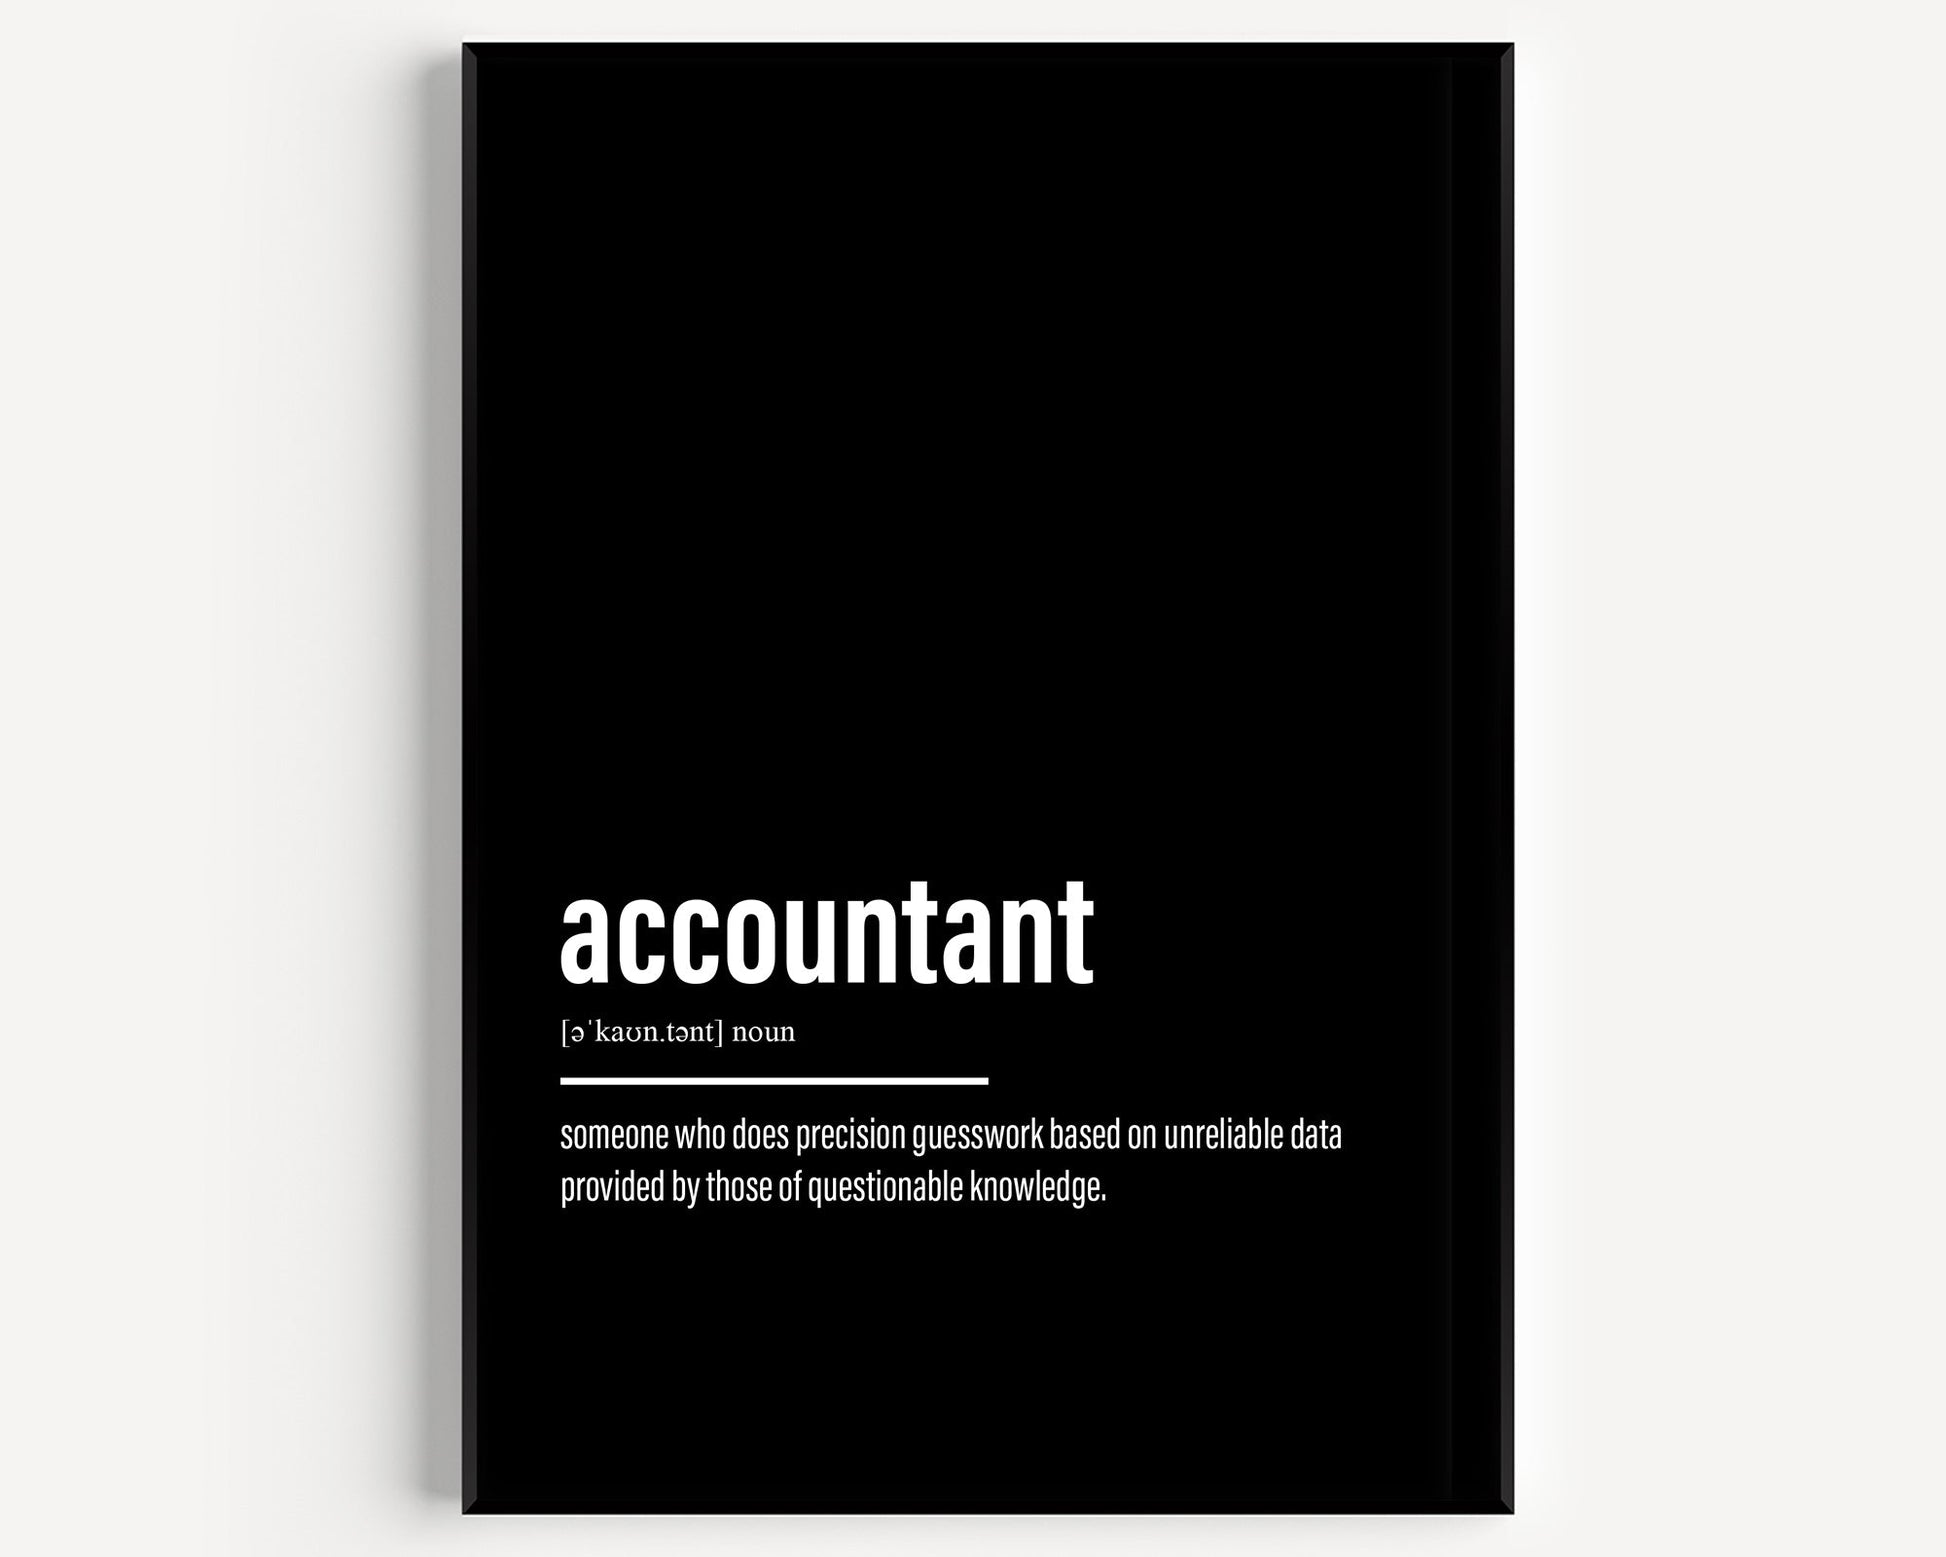 Accountant Definition Print - Magic Posters